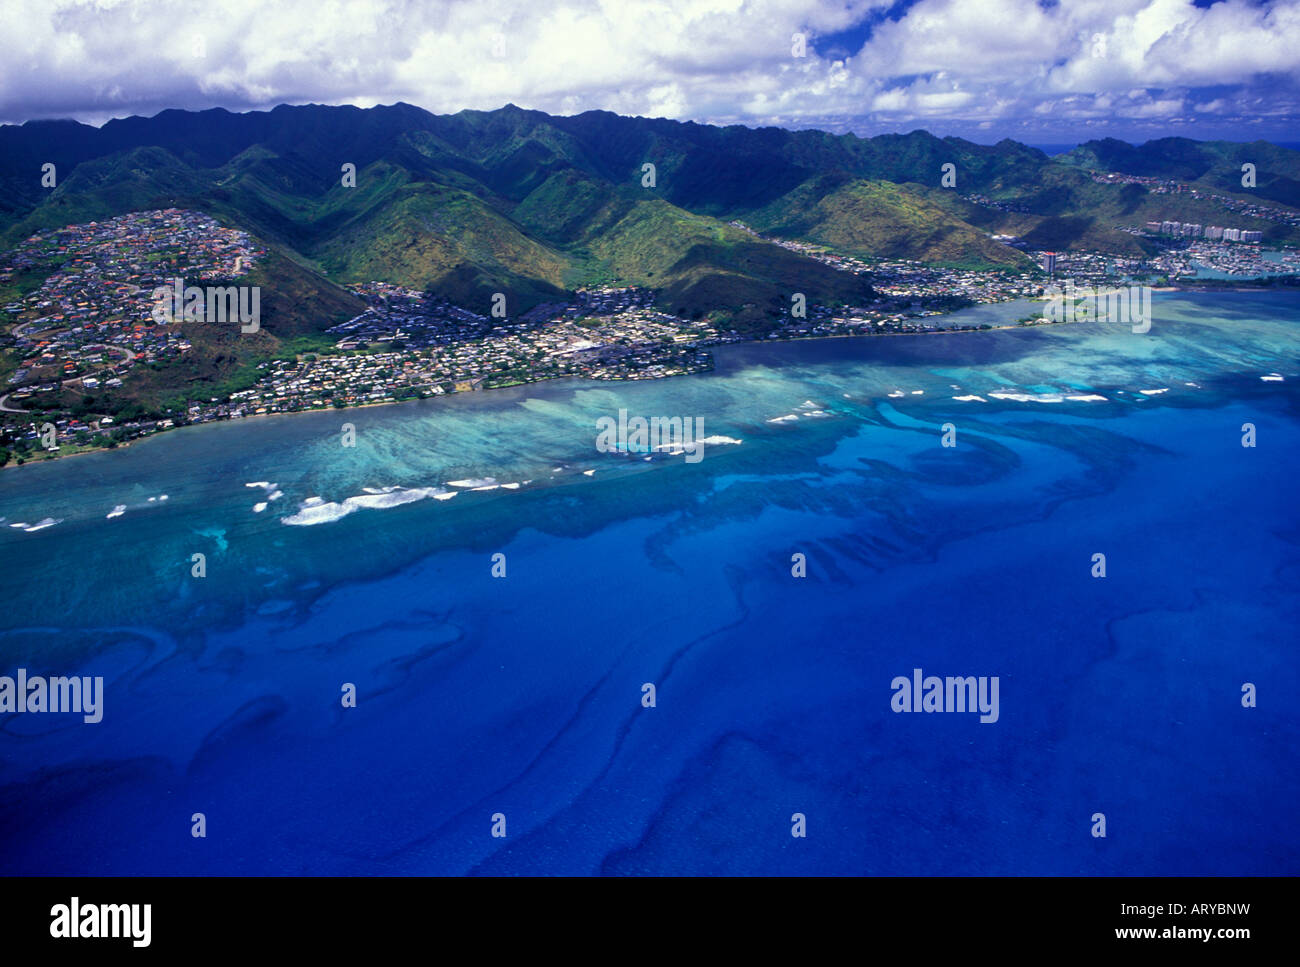 Aerial view of east Oahu with homes along the hillside mountains and wide sweeping view of the blue pacific ocean Stock Photo